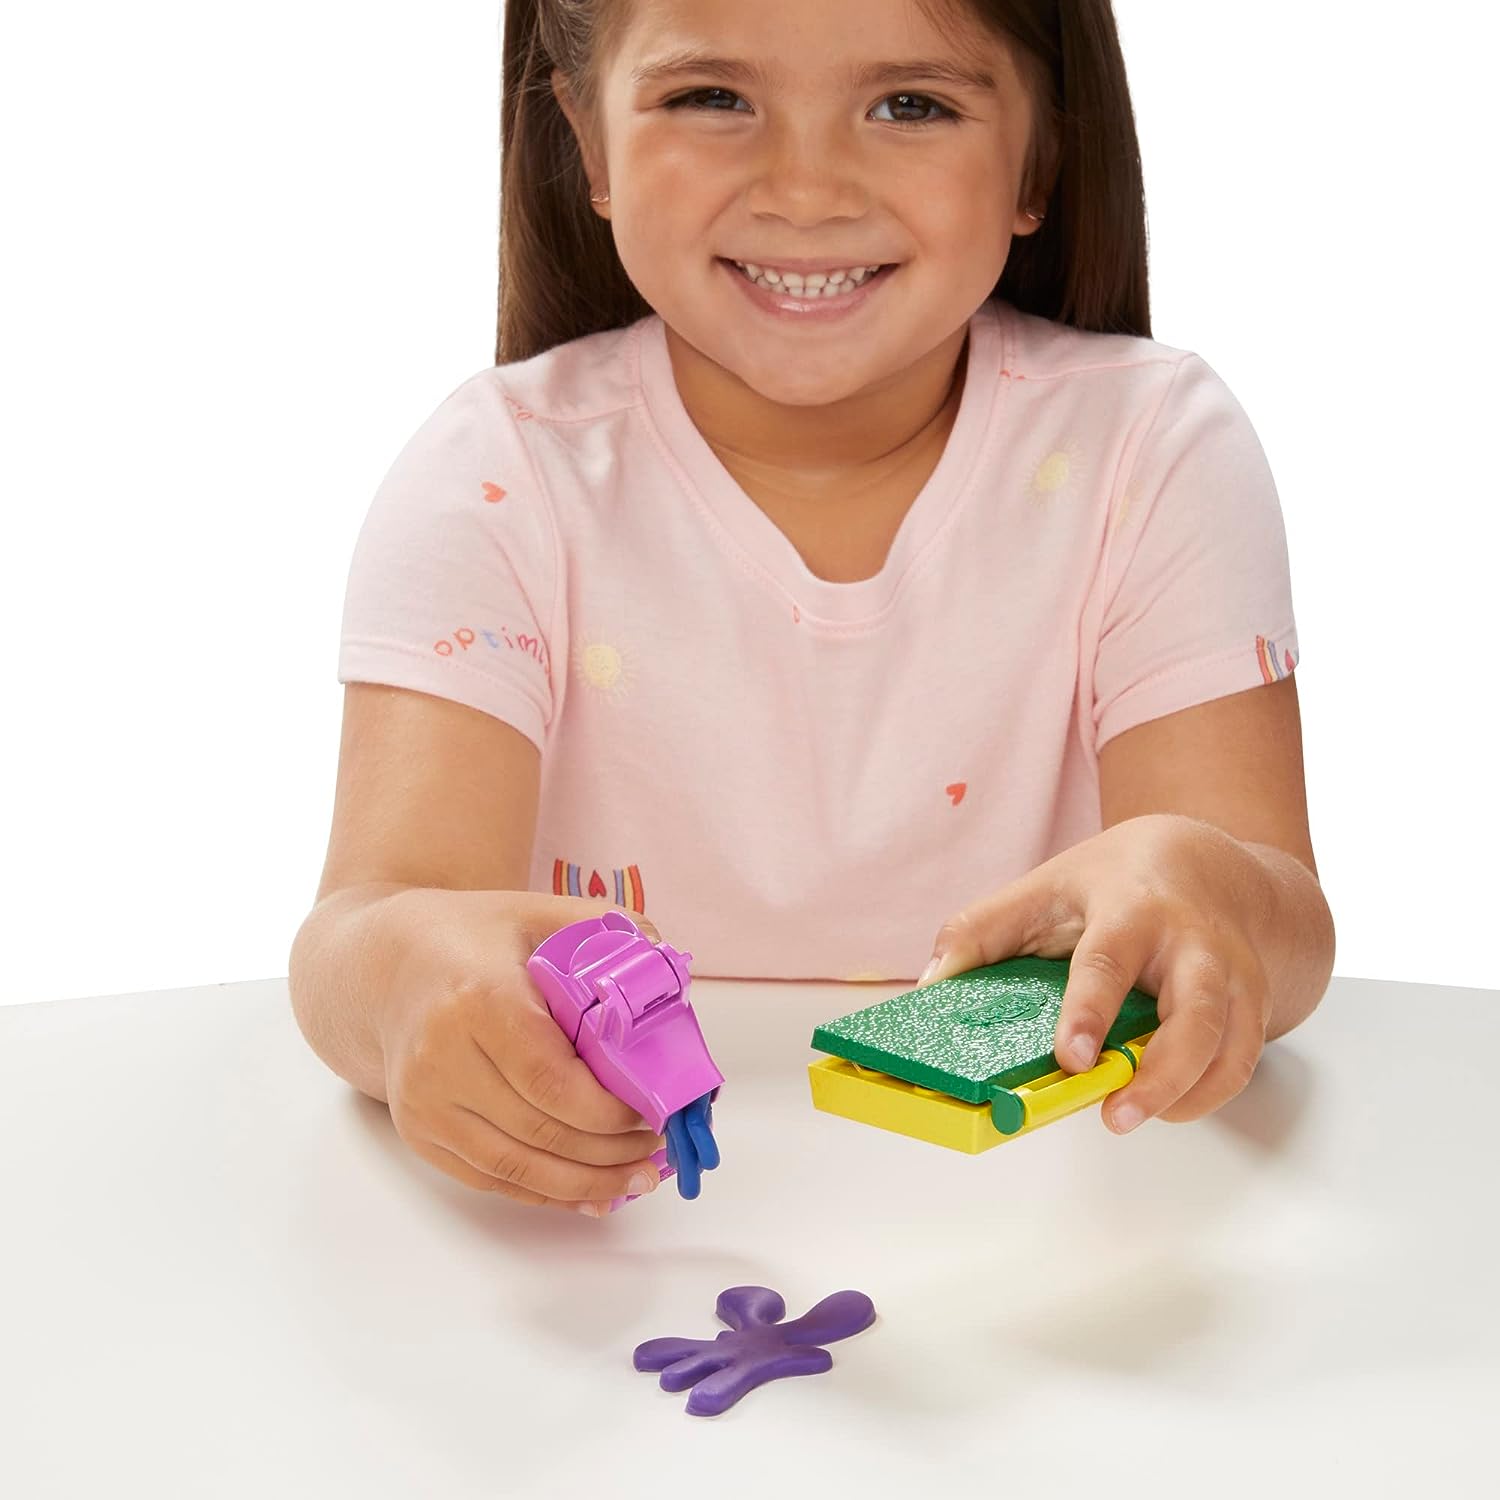 Play-Doh Zoom Vacuum and Cleanup Toy,